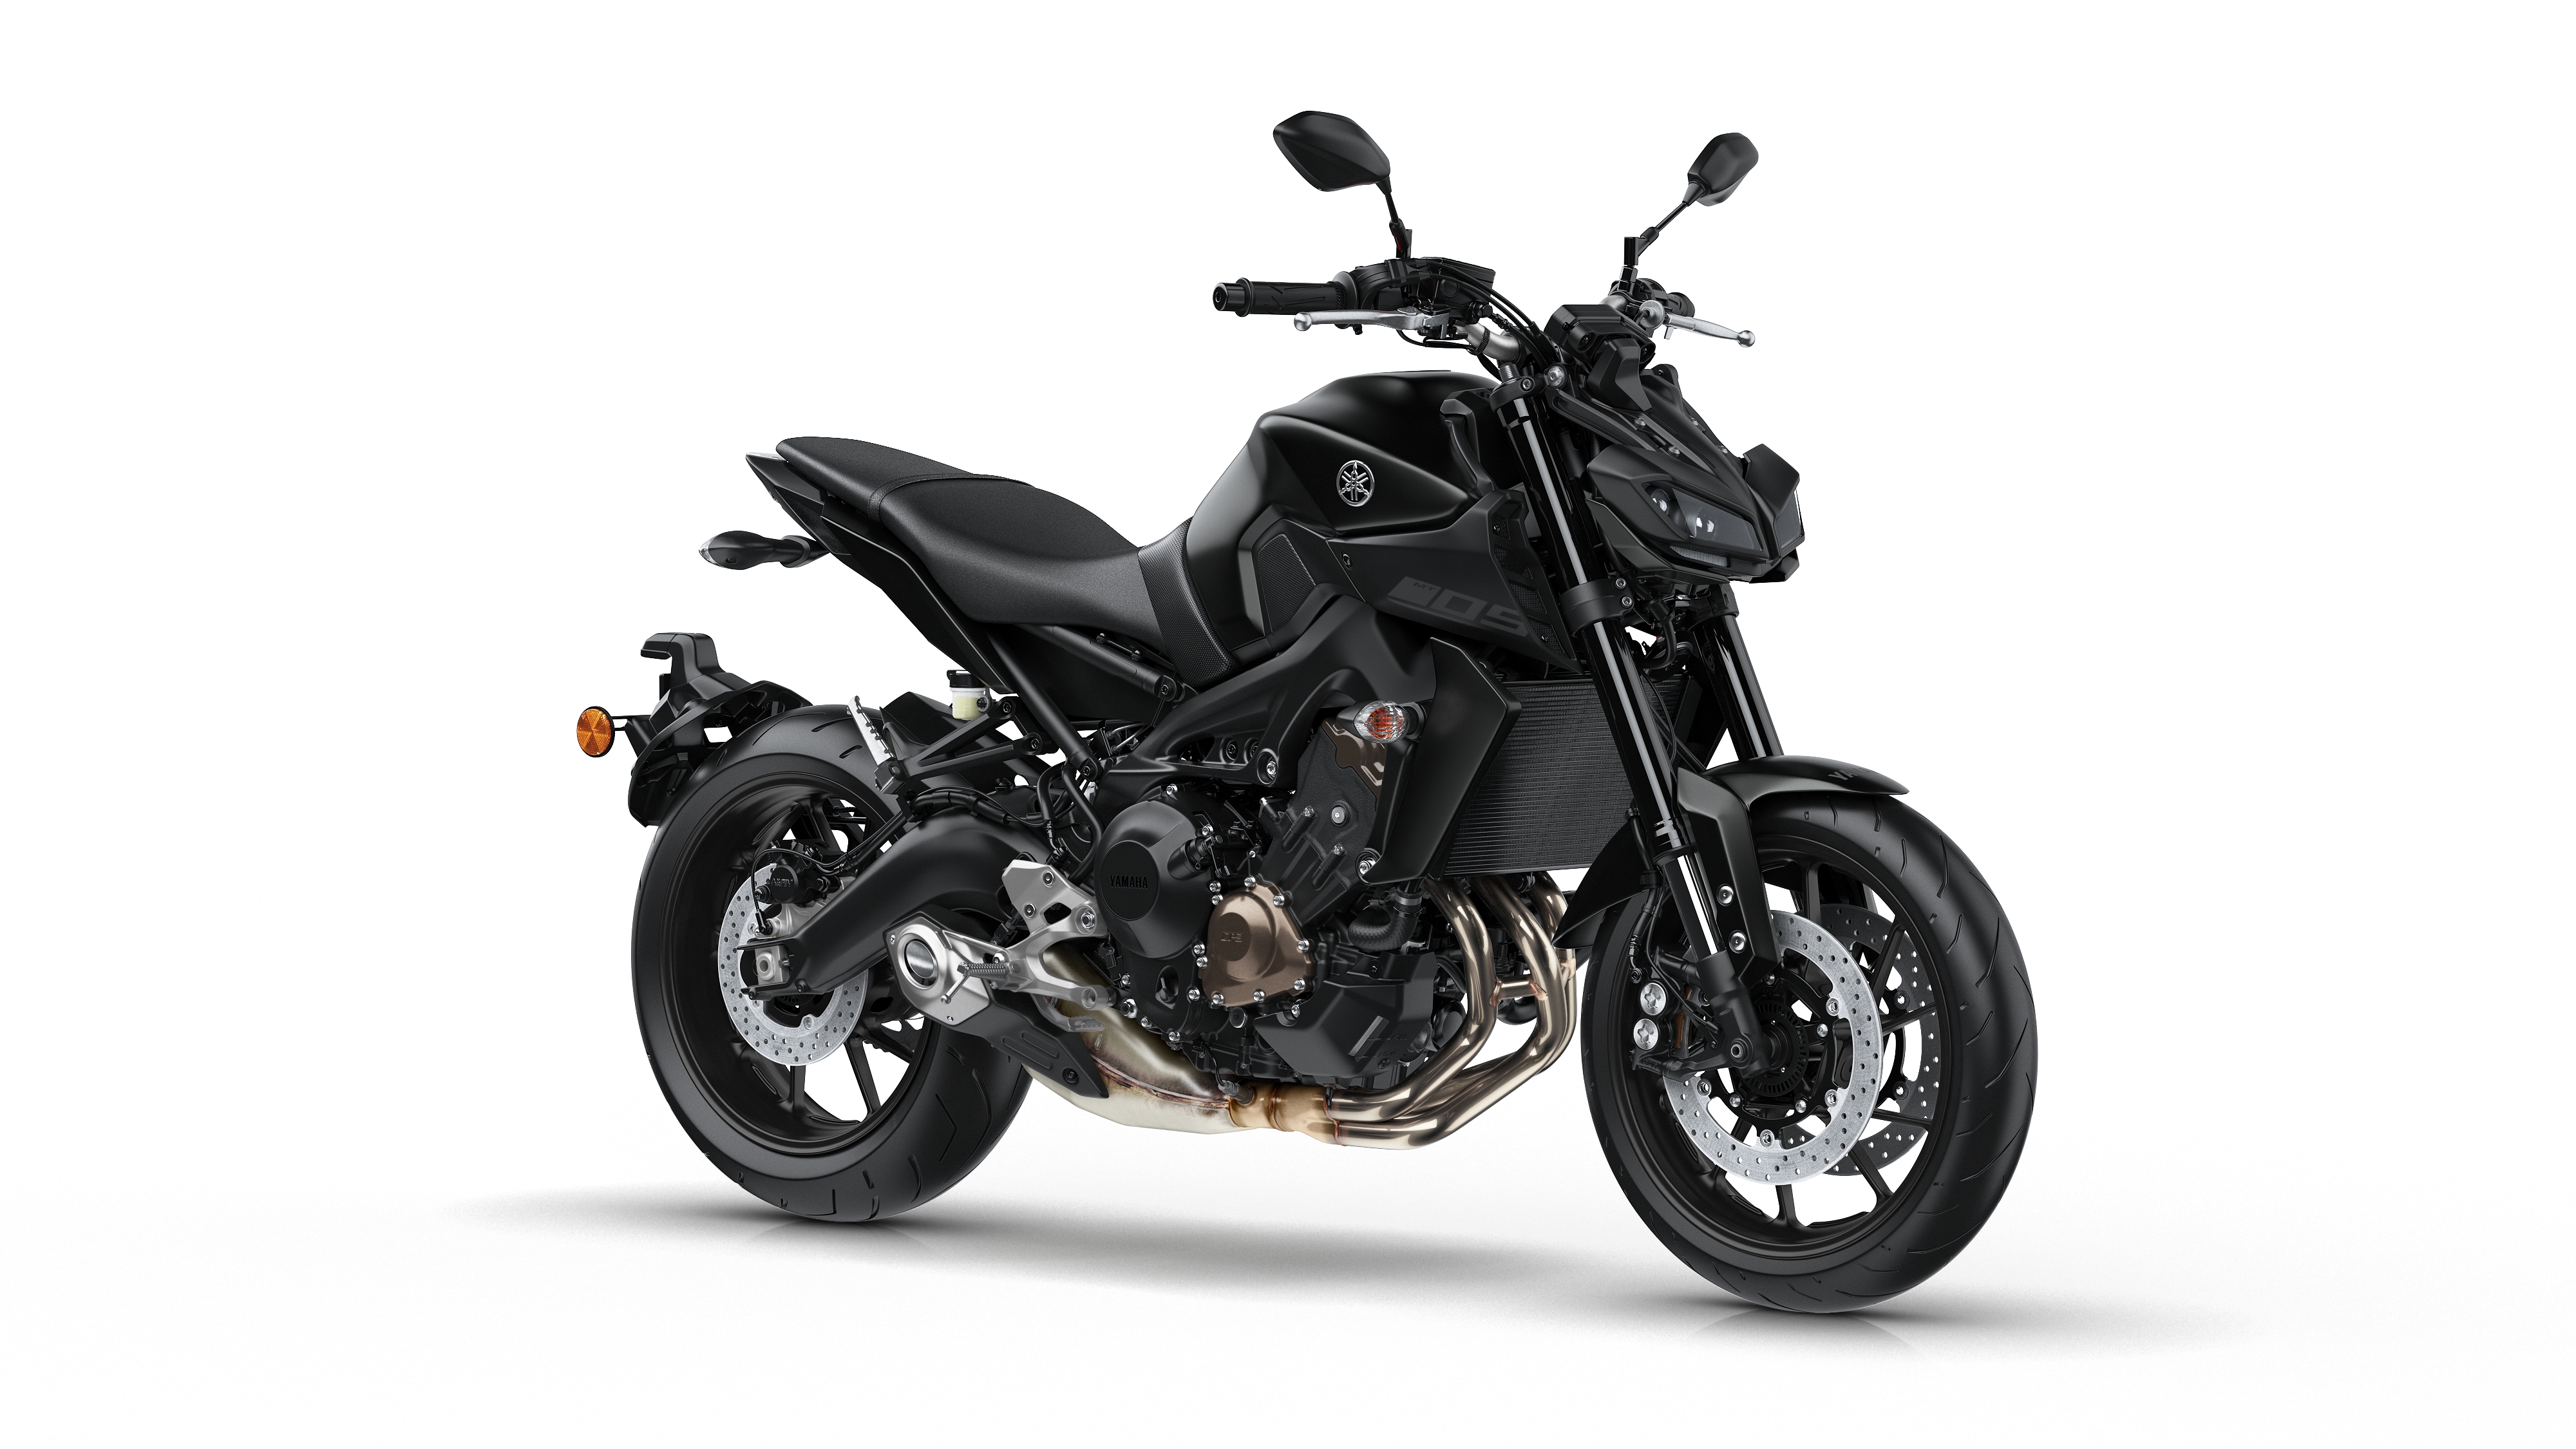 Yamaha MT-09 gets MT-10 makeover and upgrades for 2017